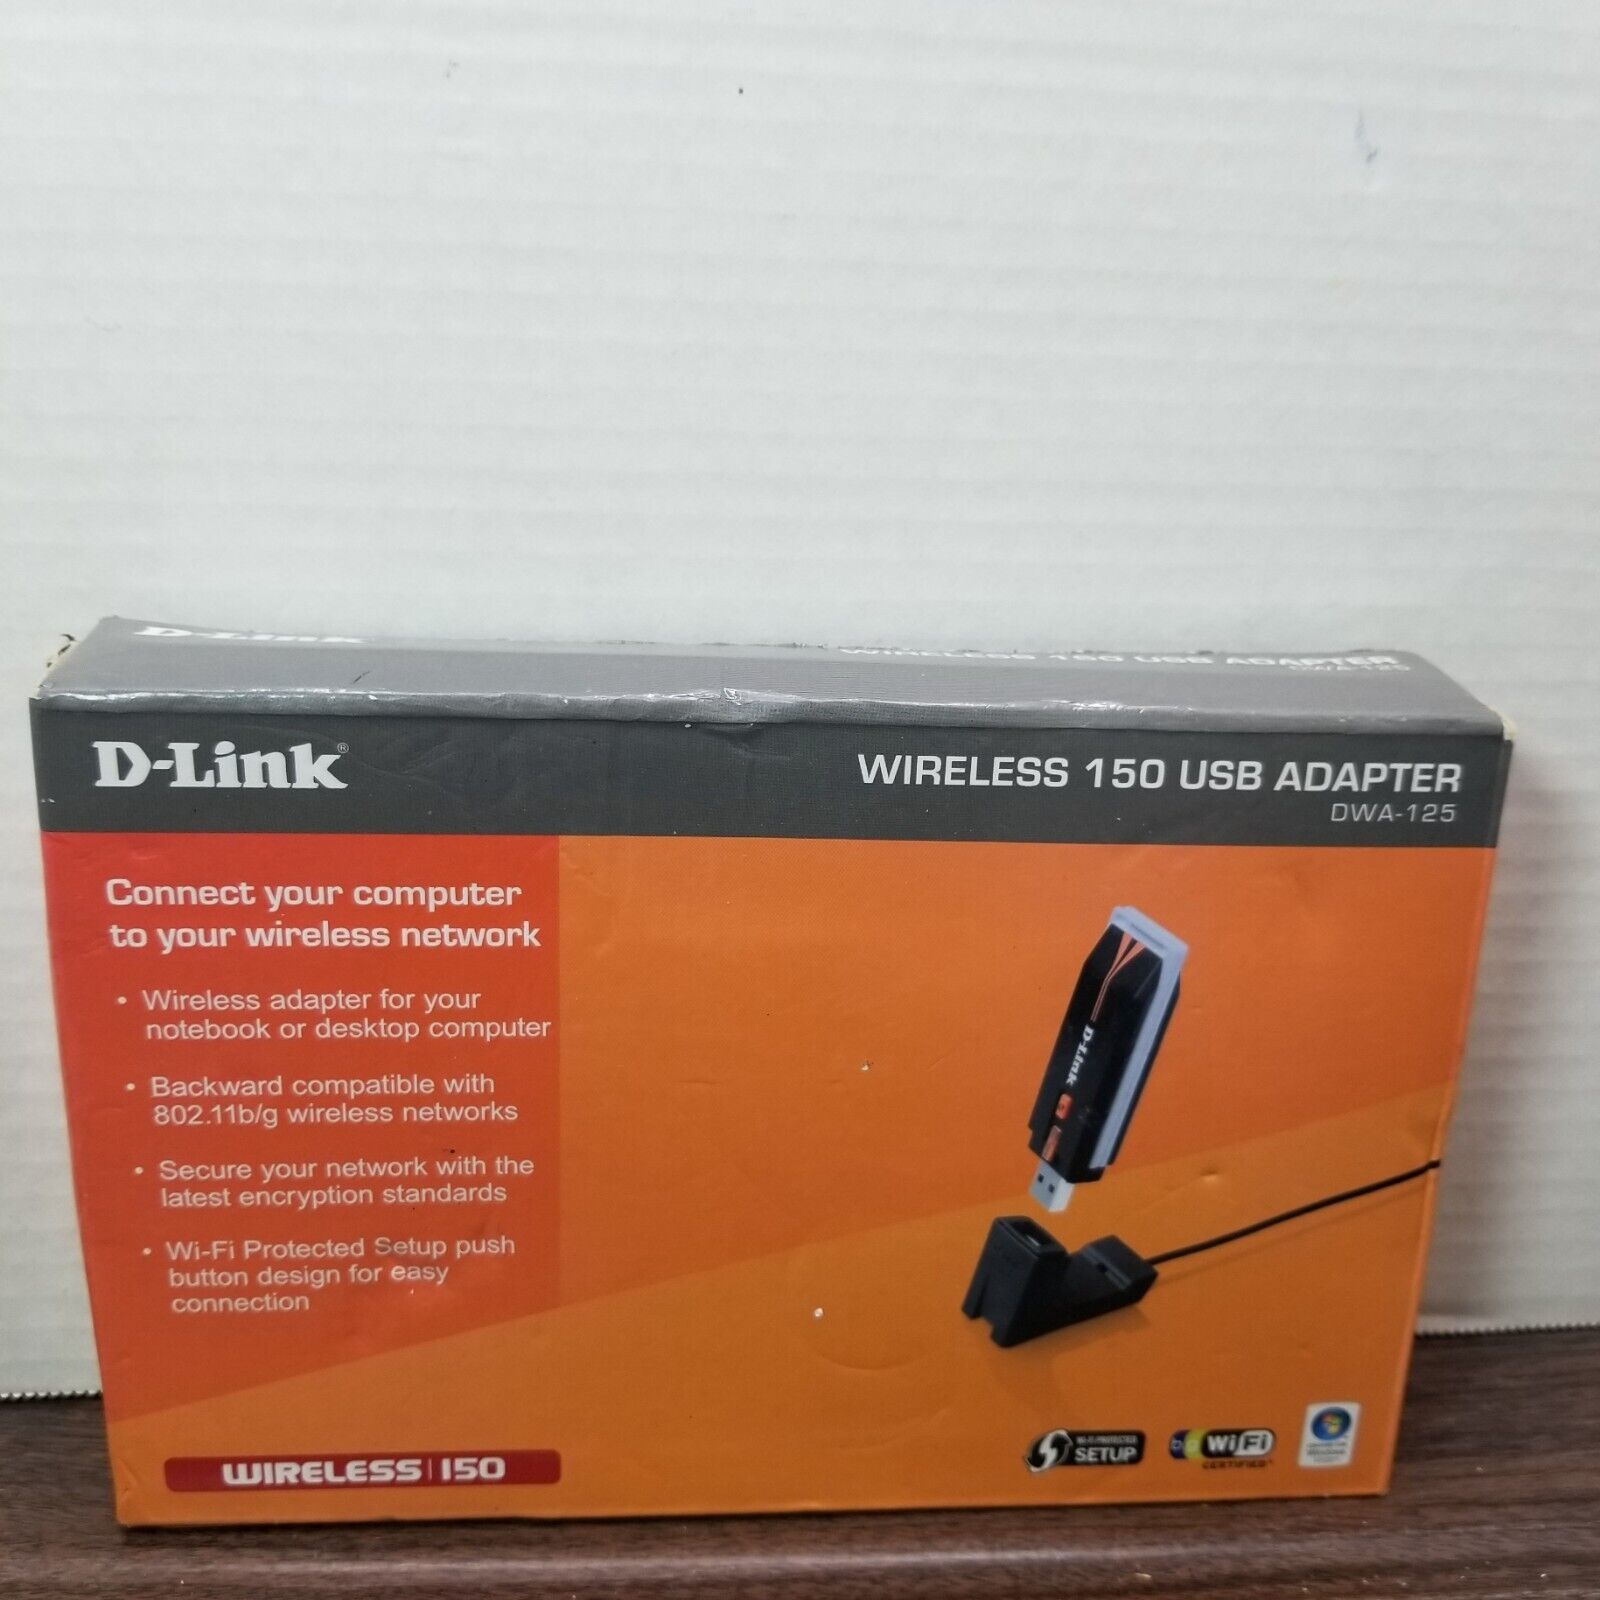 D-link DWA-125 Wireless N 150 USB Adapter Tested and Works. - £7.89 GBP